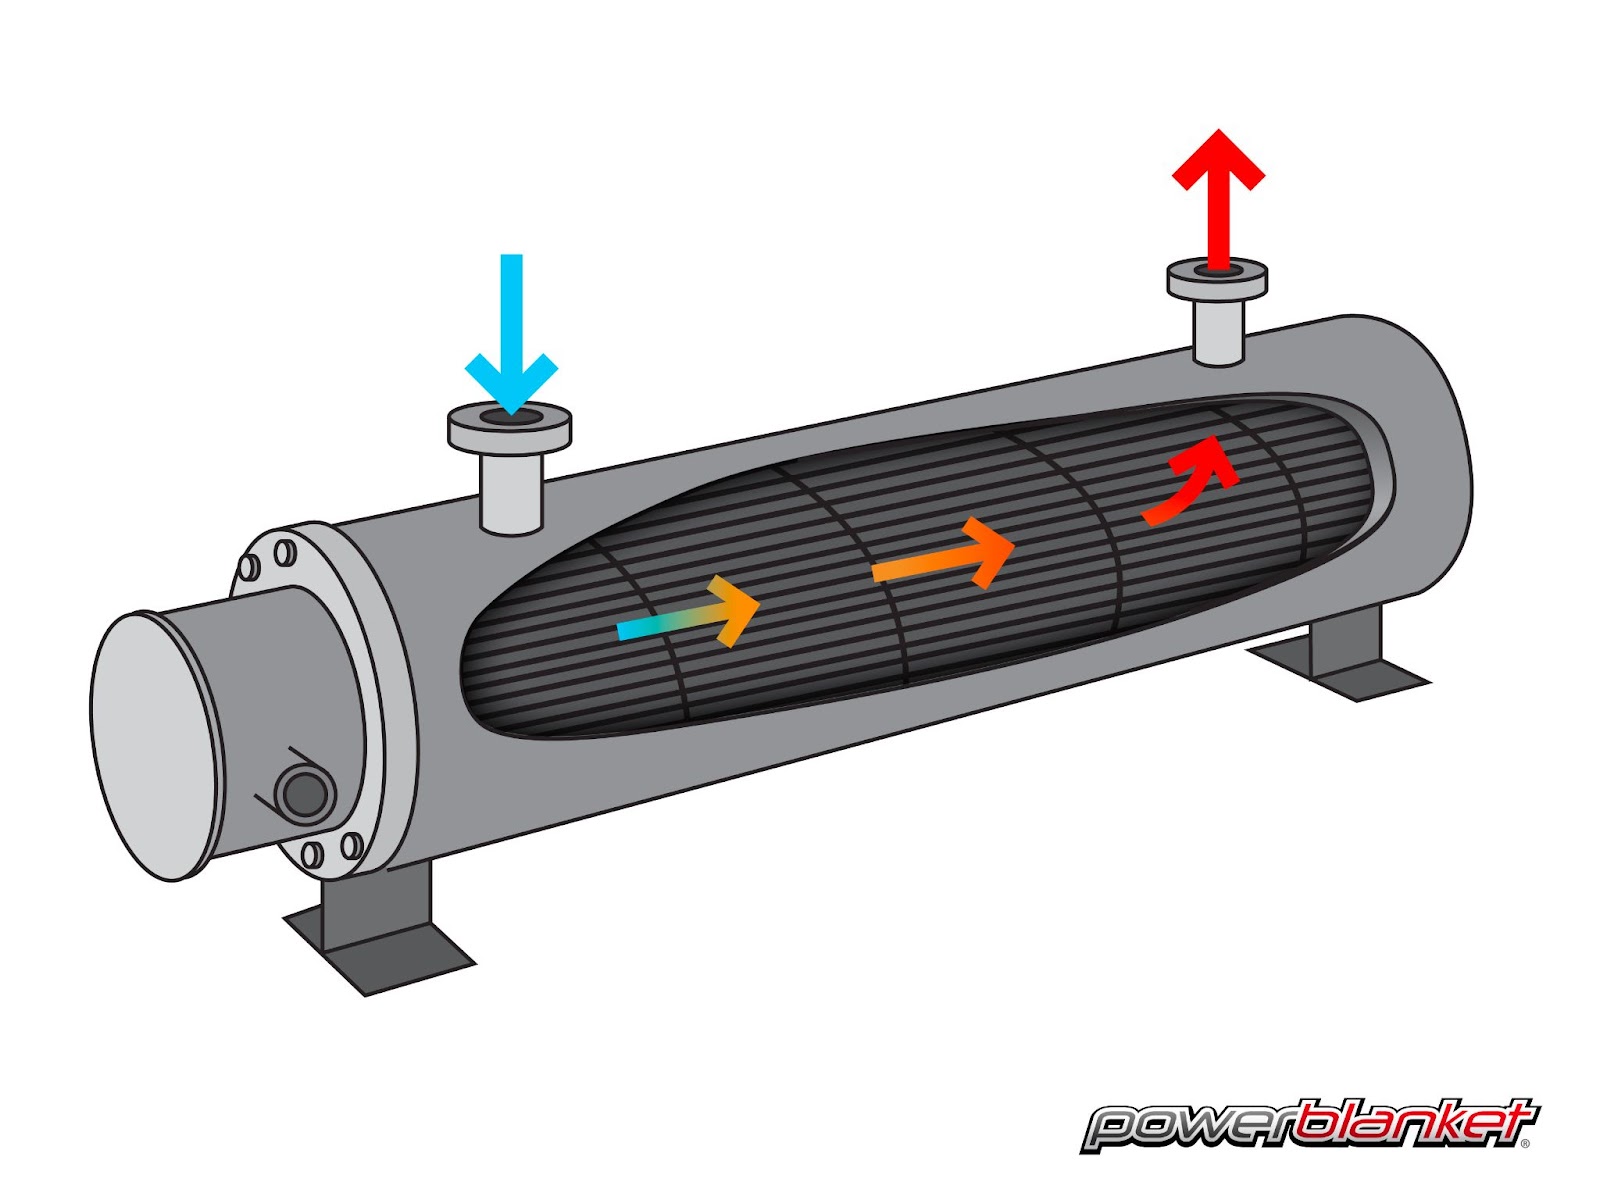 Using Electric Heaters as Heat Exchangers